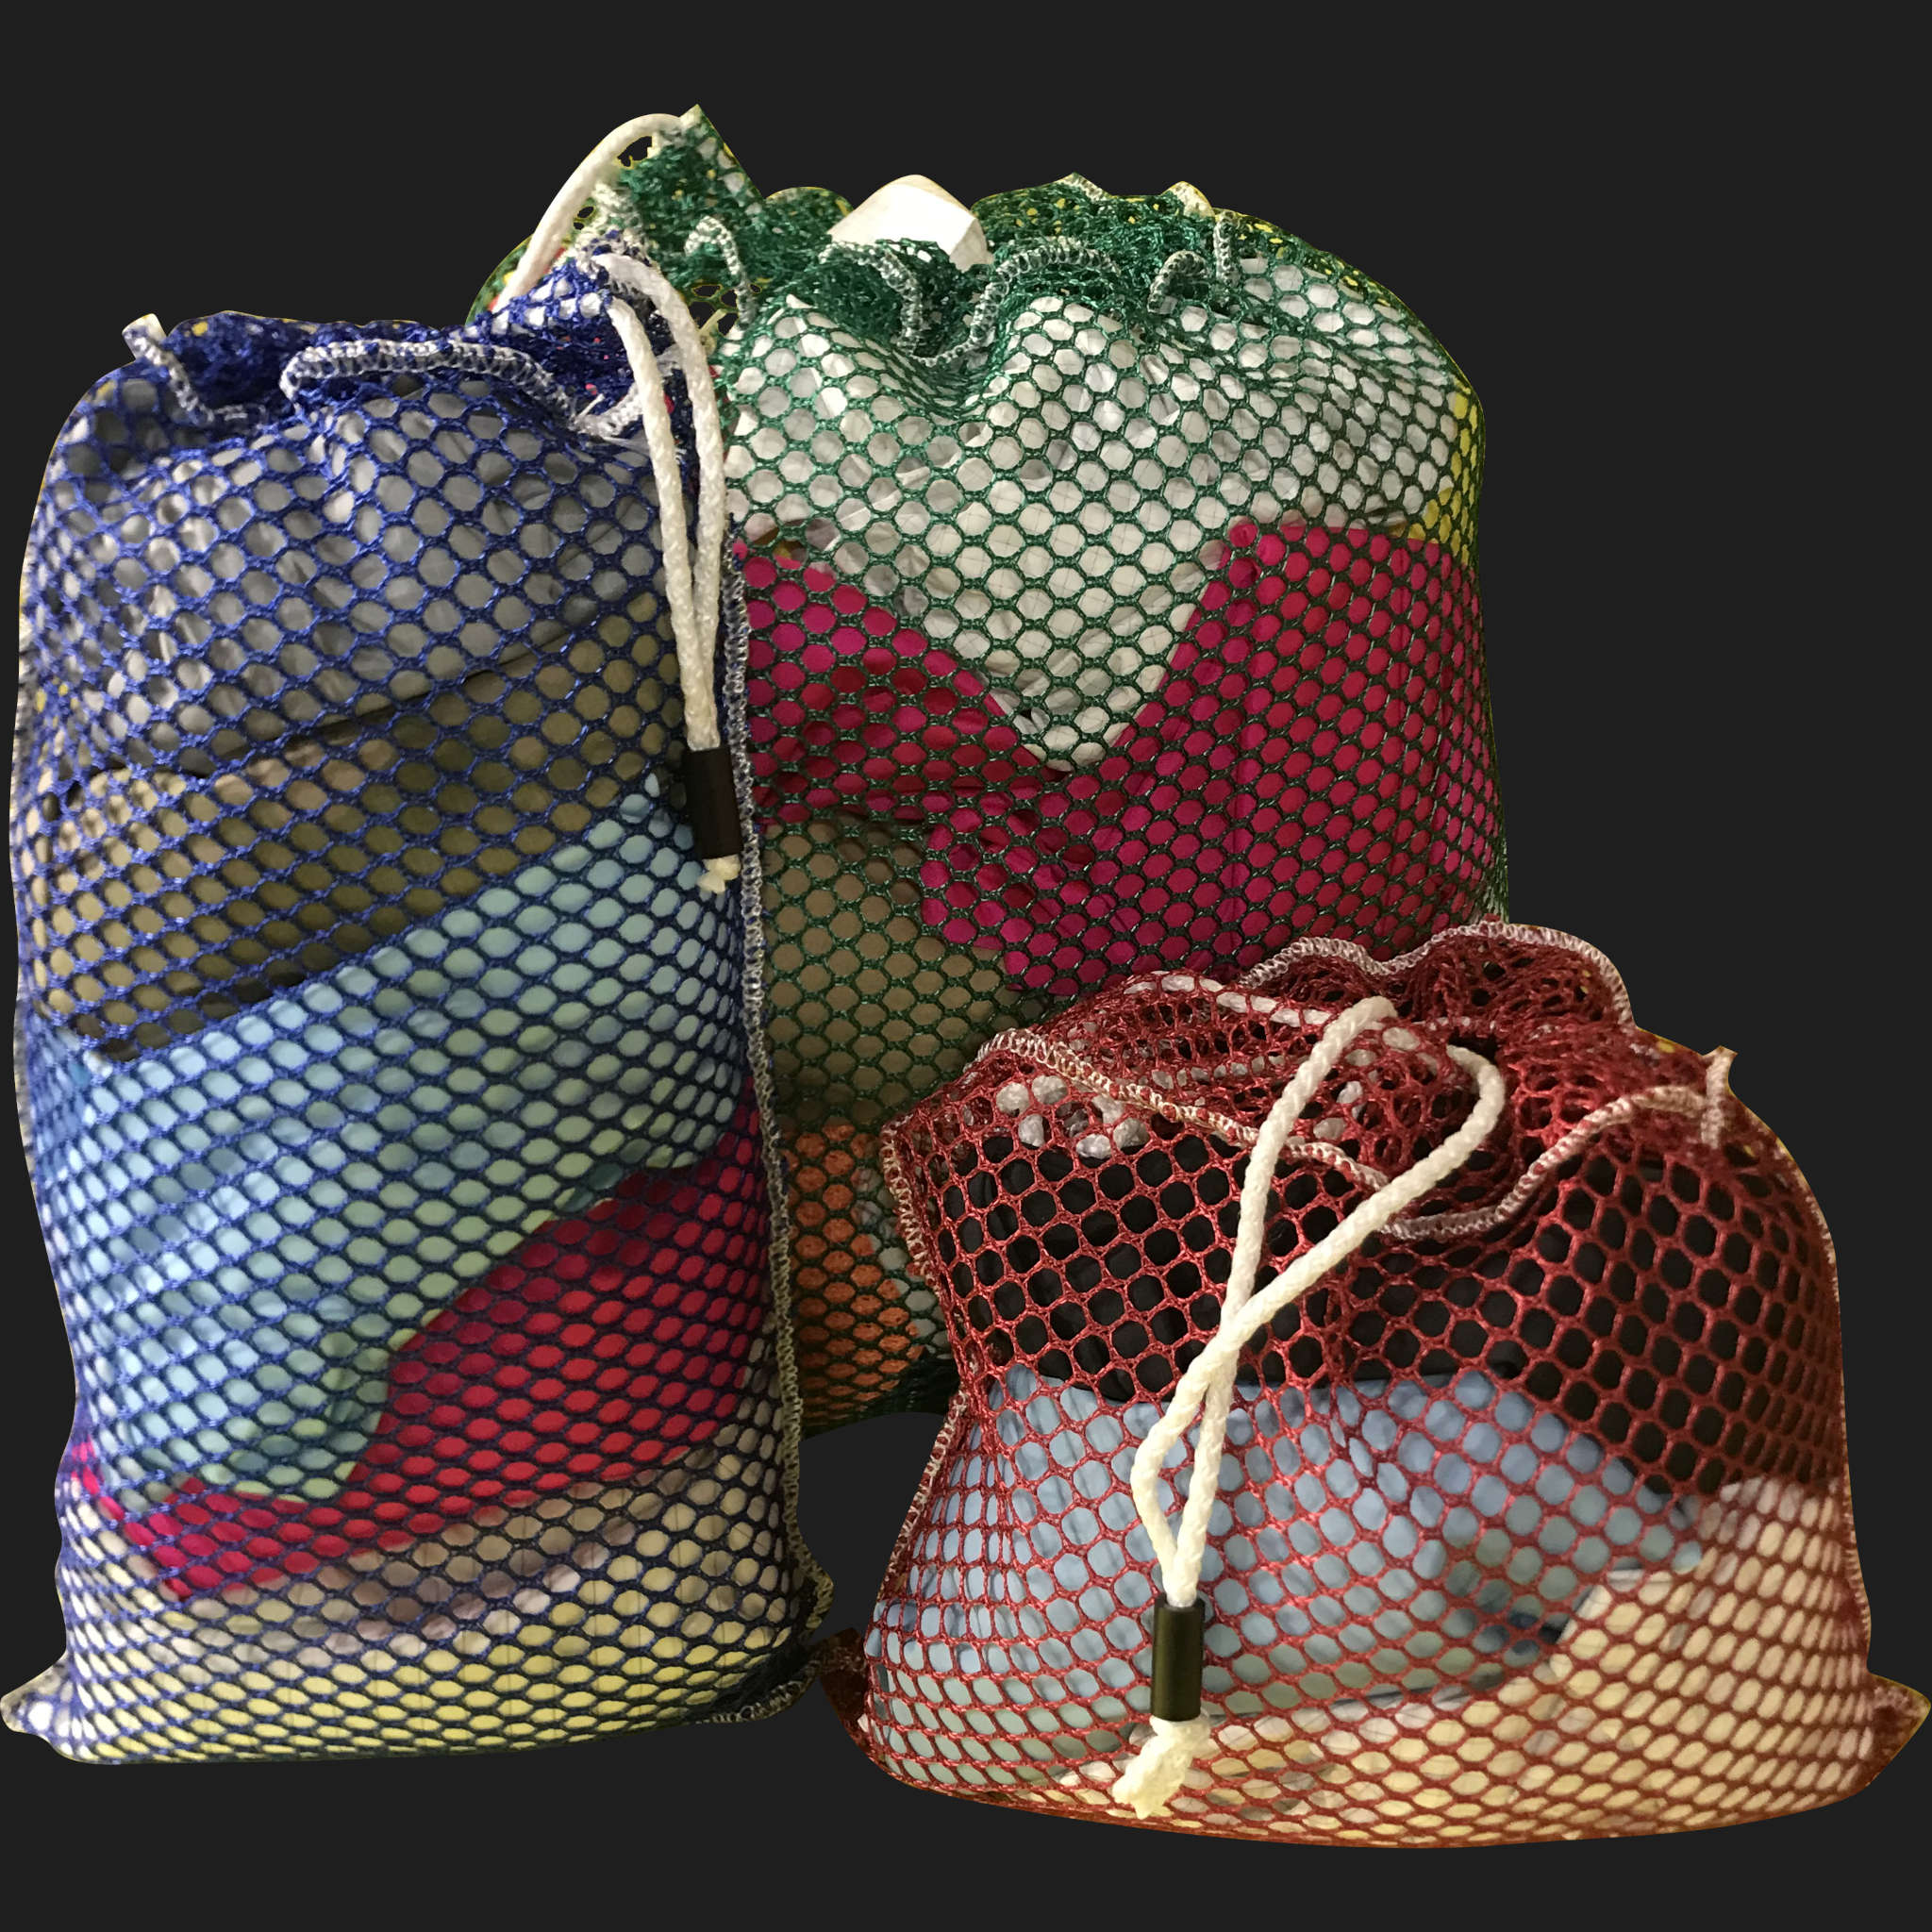 30" x 36" Customized Mesh-Net-Laundry Bags Heavy Duty with Cord and barrellock closure